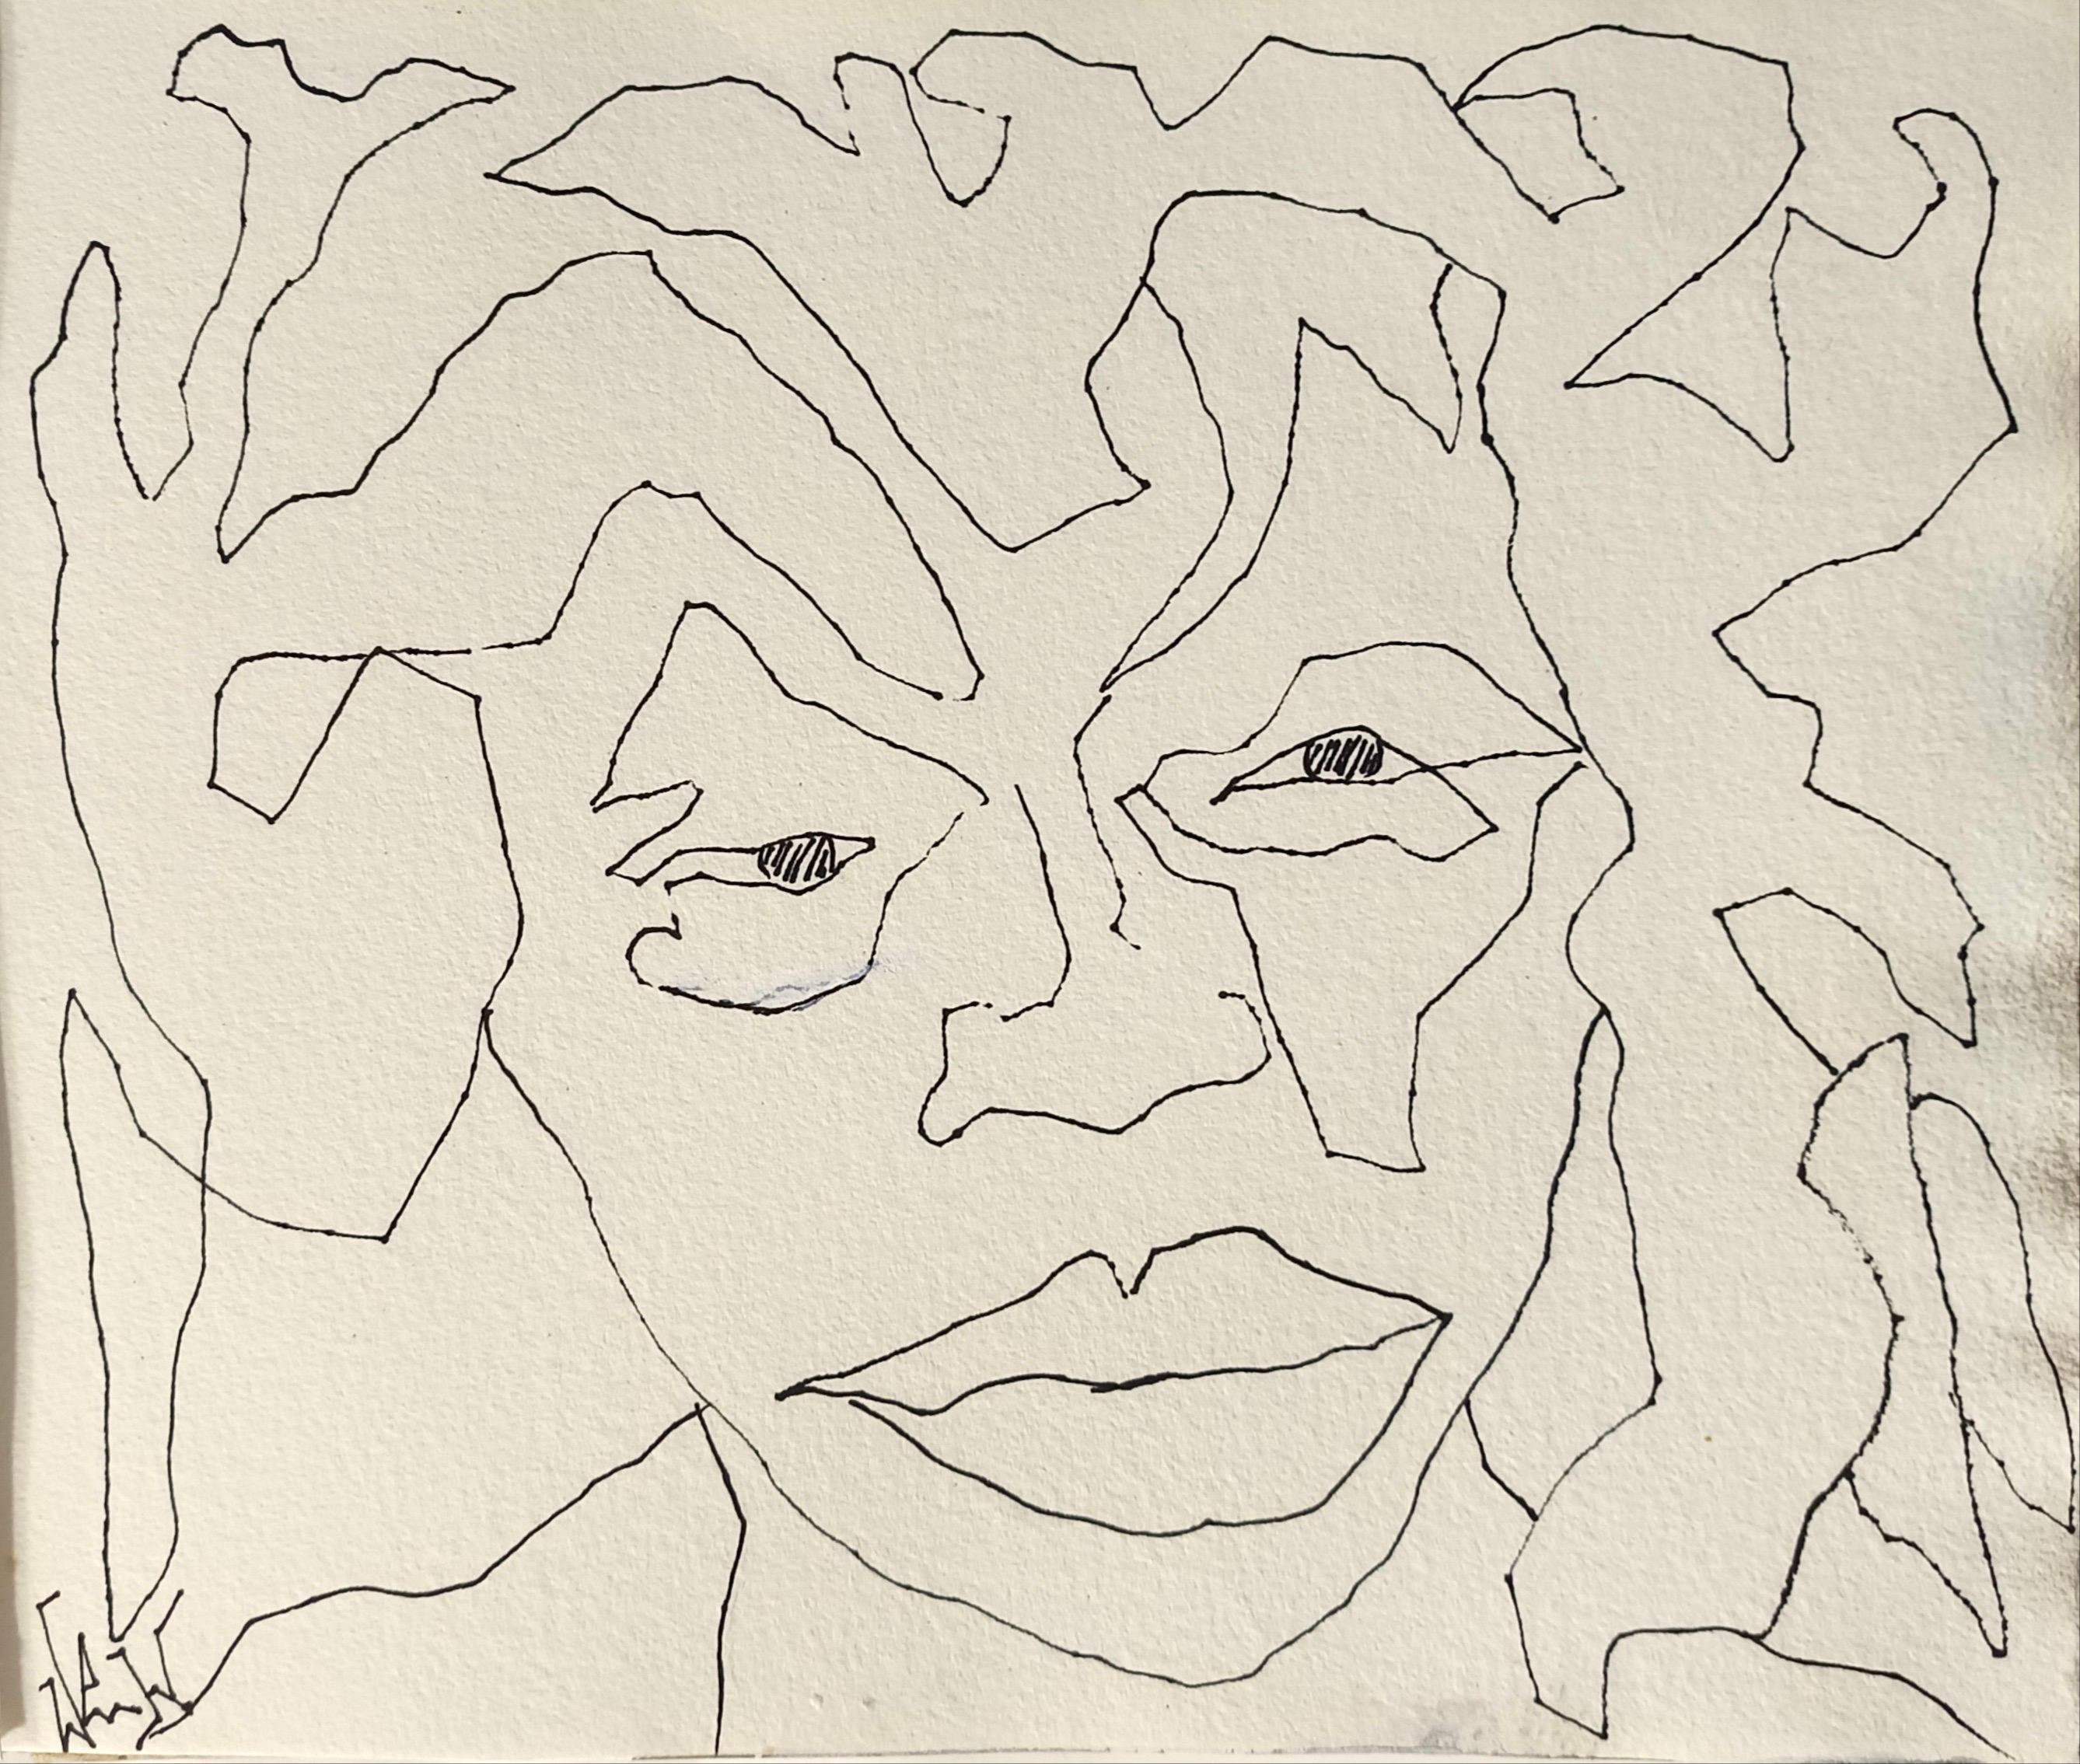 "Afro" by Enzio Wenk, 2022 - Black India Ink Drawing on Paper, Figurative